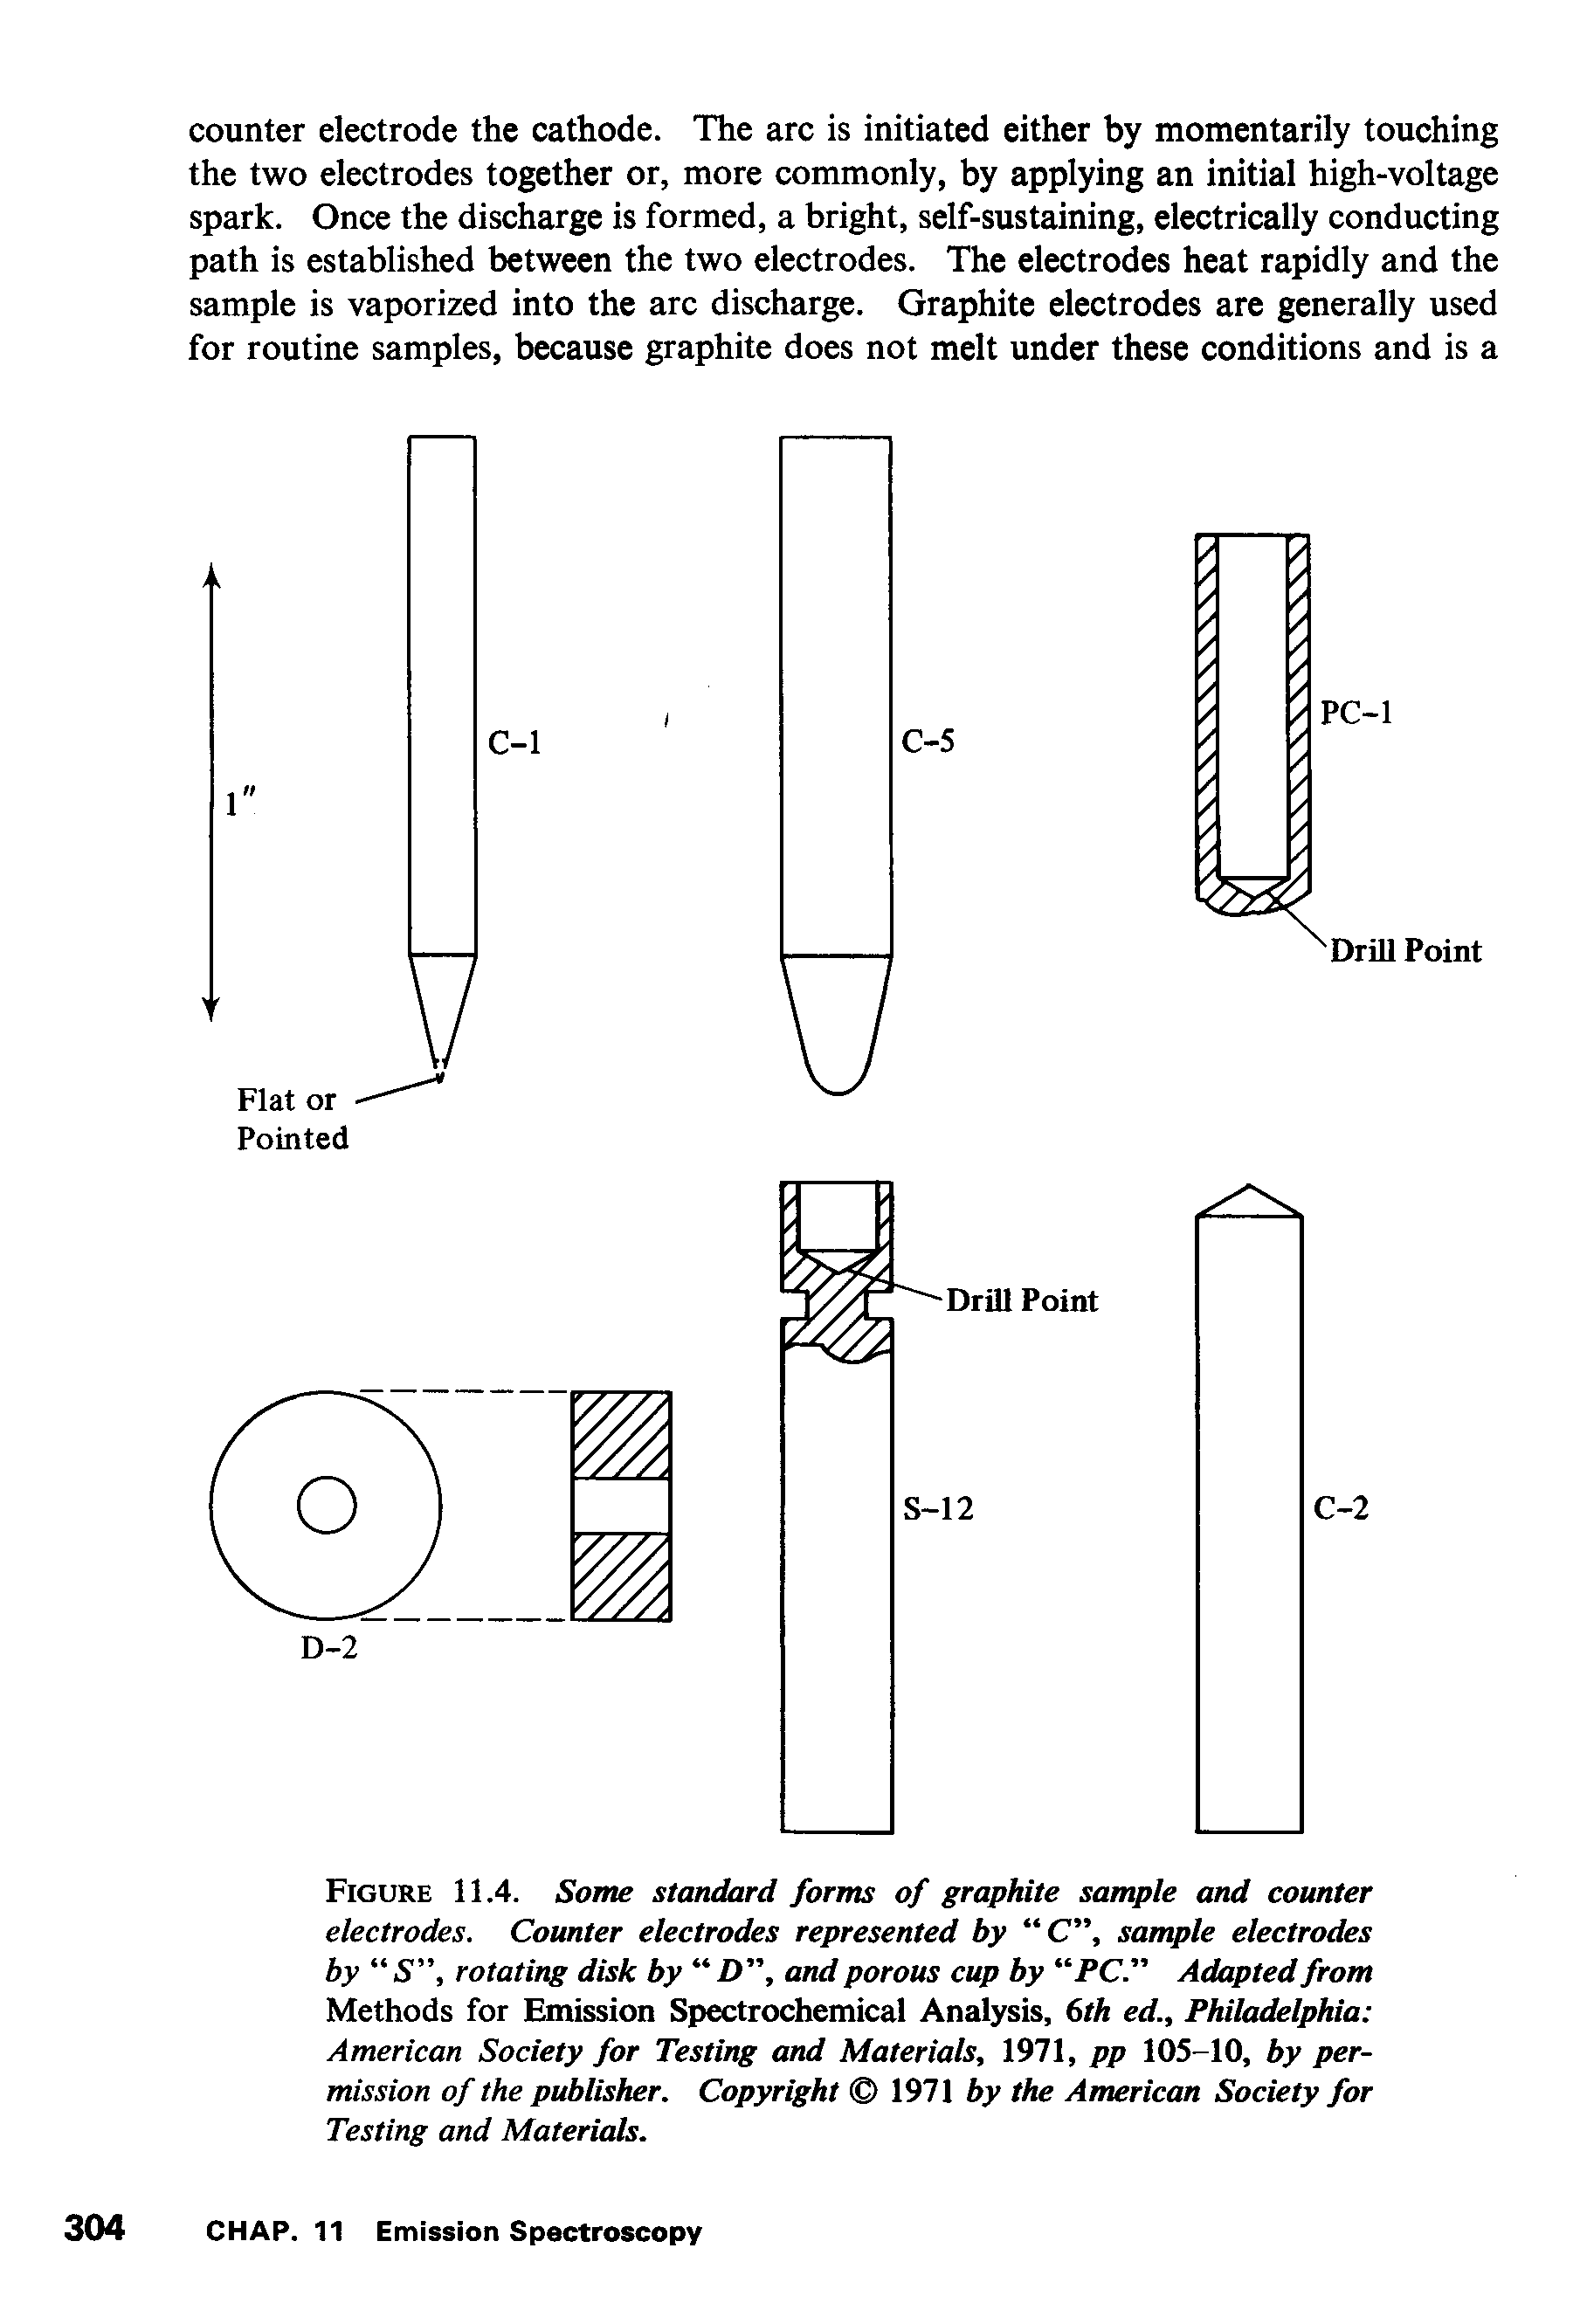 Figure 11.4. Some standard forms of graphite sample and counter electrodes. Counter electrodes represented by C , sample electrodes by S rotating disk by D , and porous cup by PC." Adapted from Methods for Emission Spectrochemical Analysis, 6th ed., Philadelphia American Society for Testing and Materials, 1971, pp 105-10, by permission of the publisher. Copyright 1971 by the American Society for Testing and Materials.